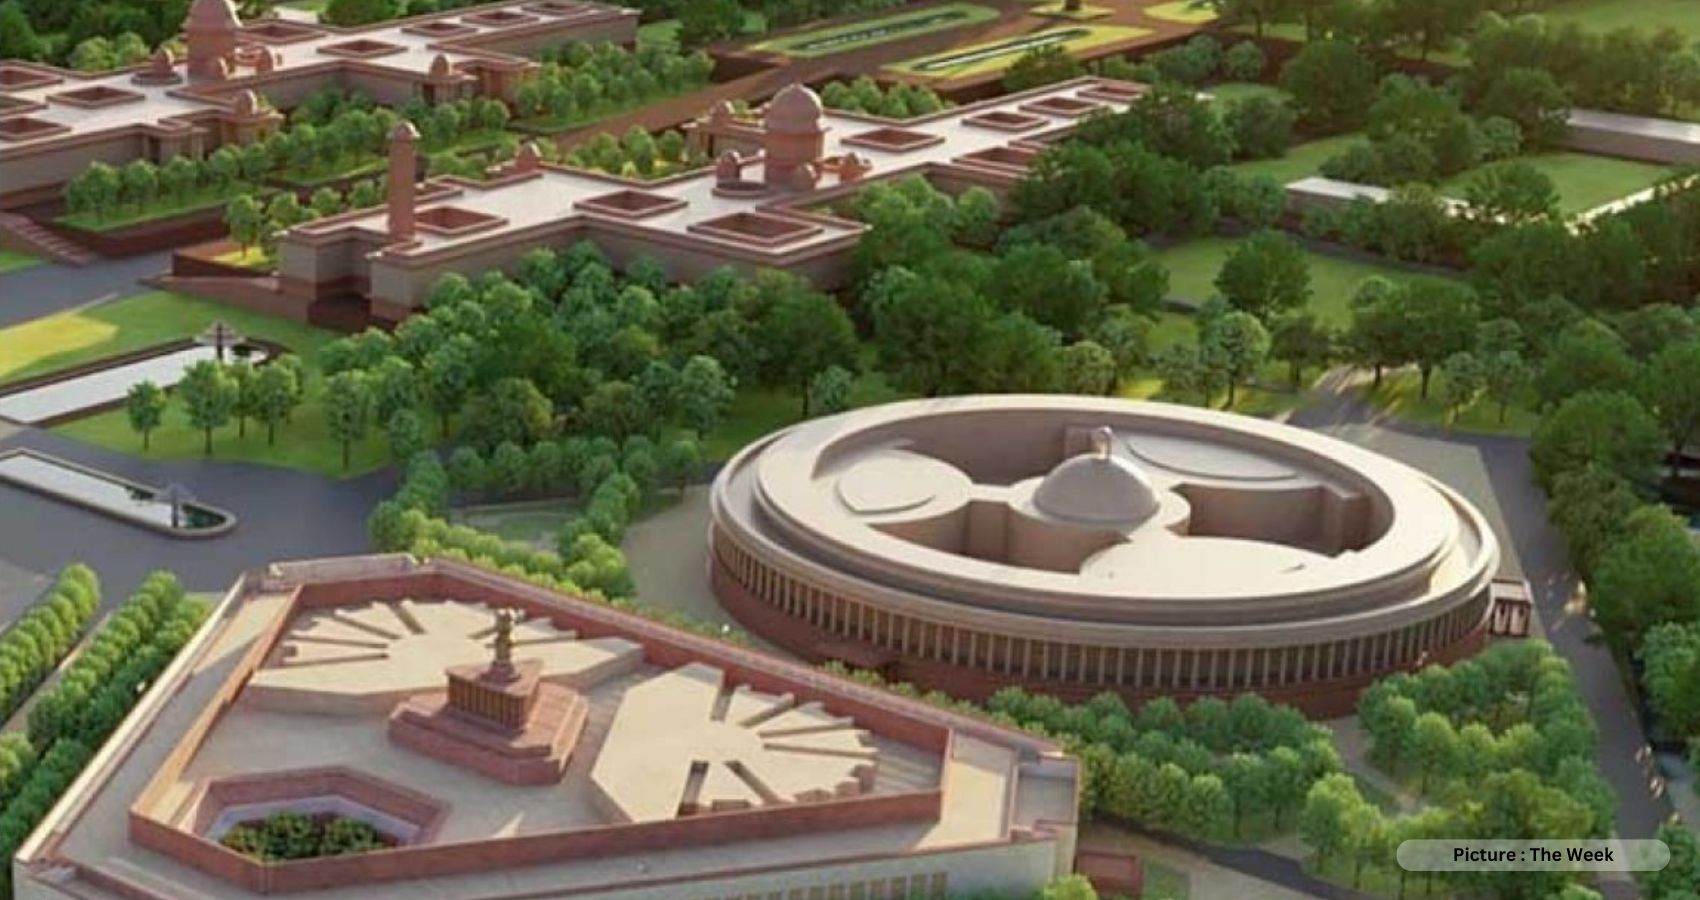 Prime Minister Narendra Modi to Inaugurate New Parliament Building on May 28, Featuring Increased Seating Capacity